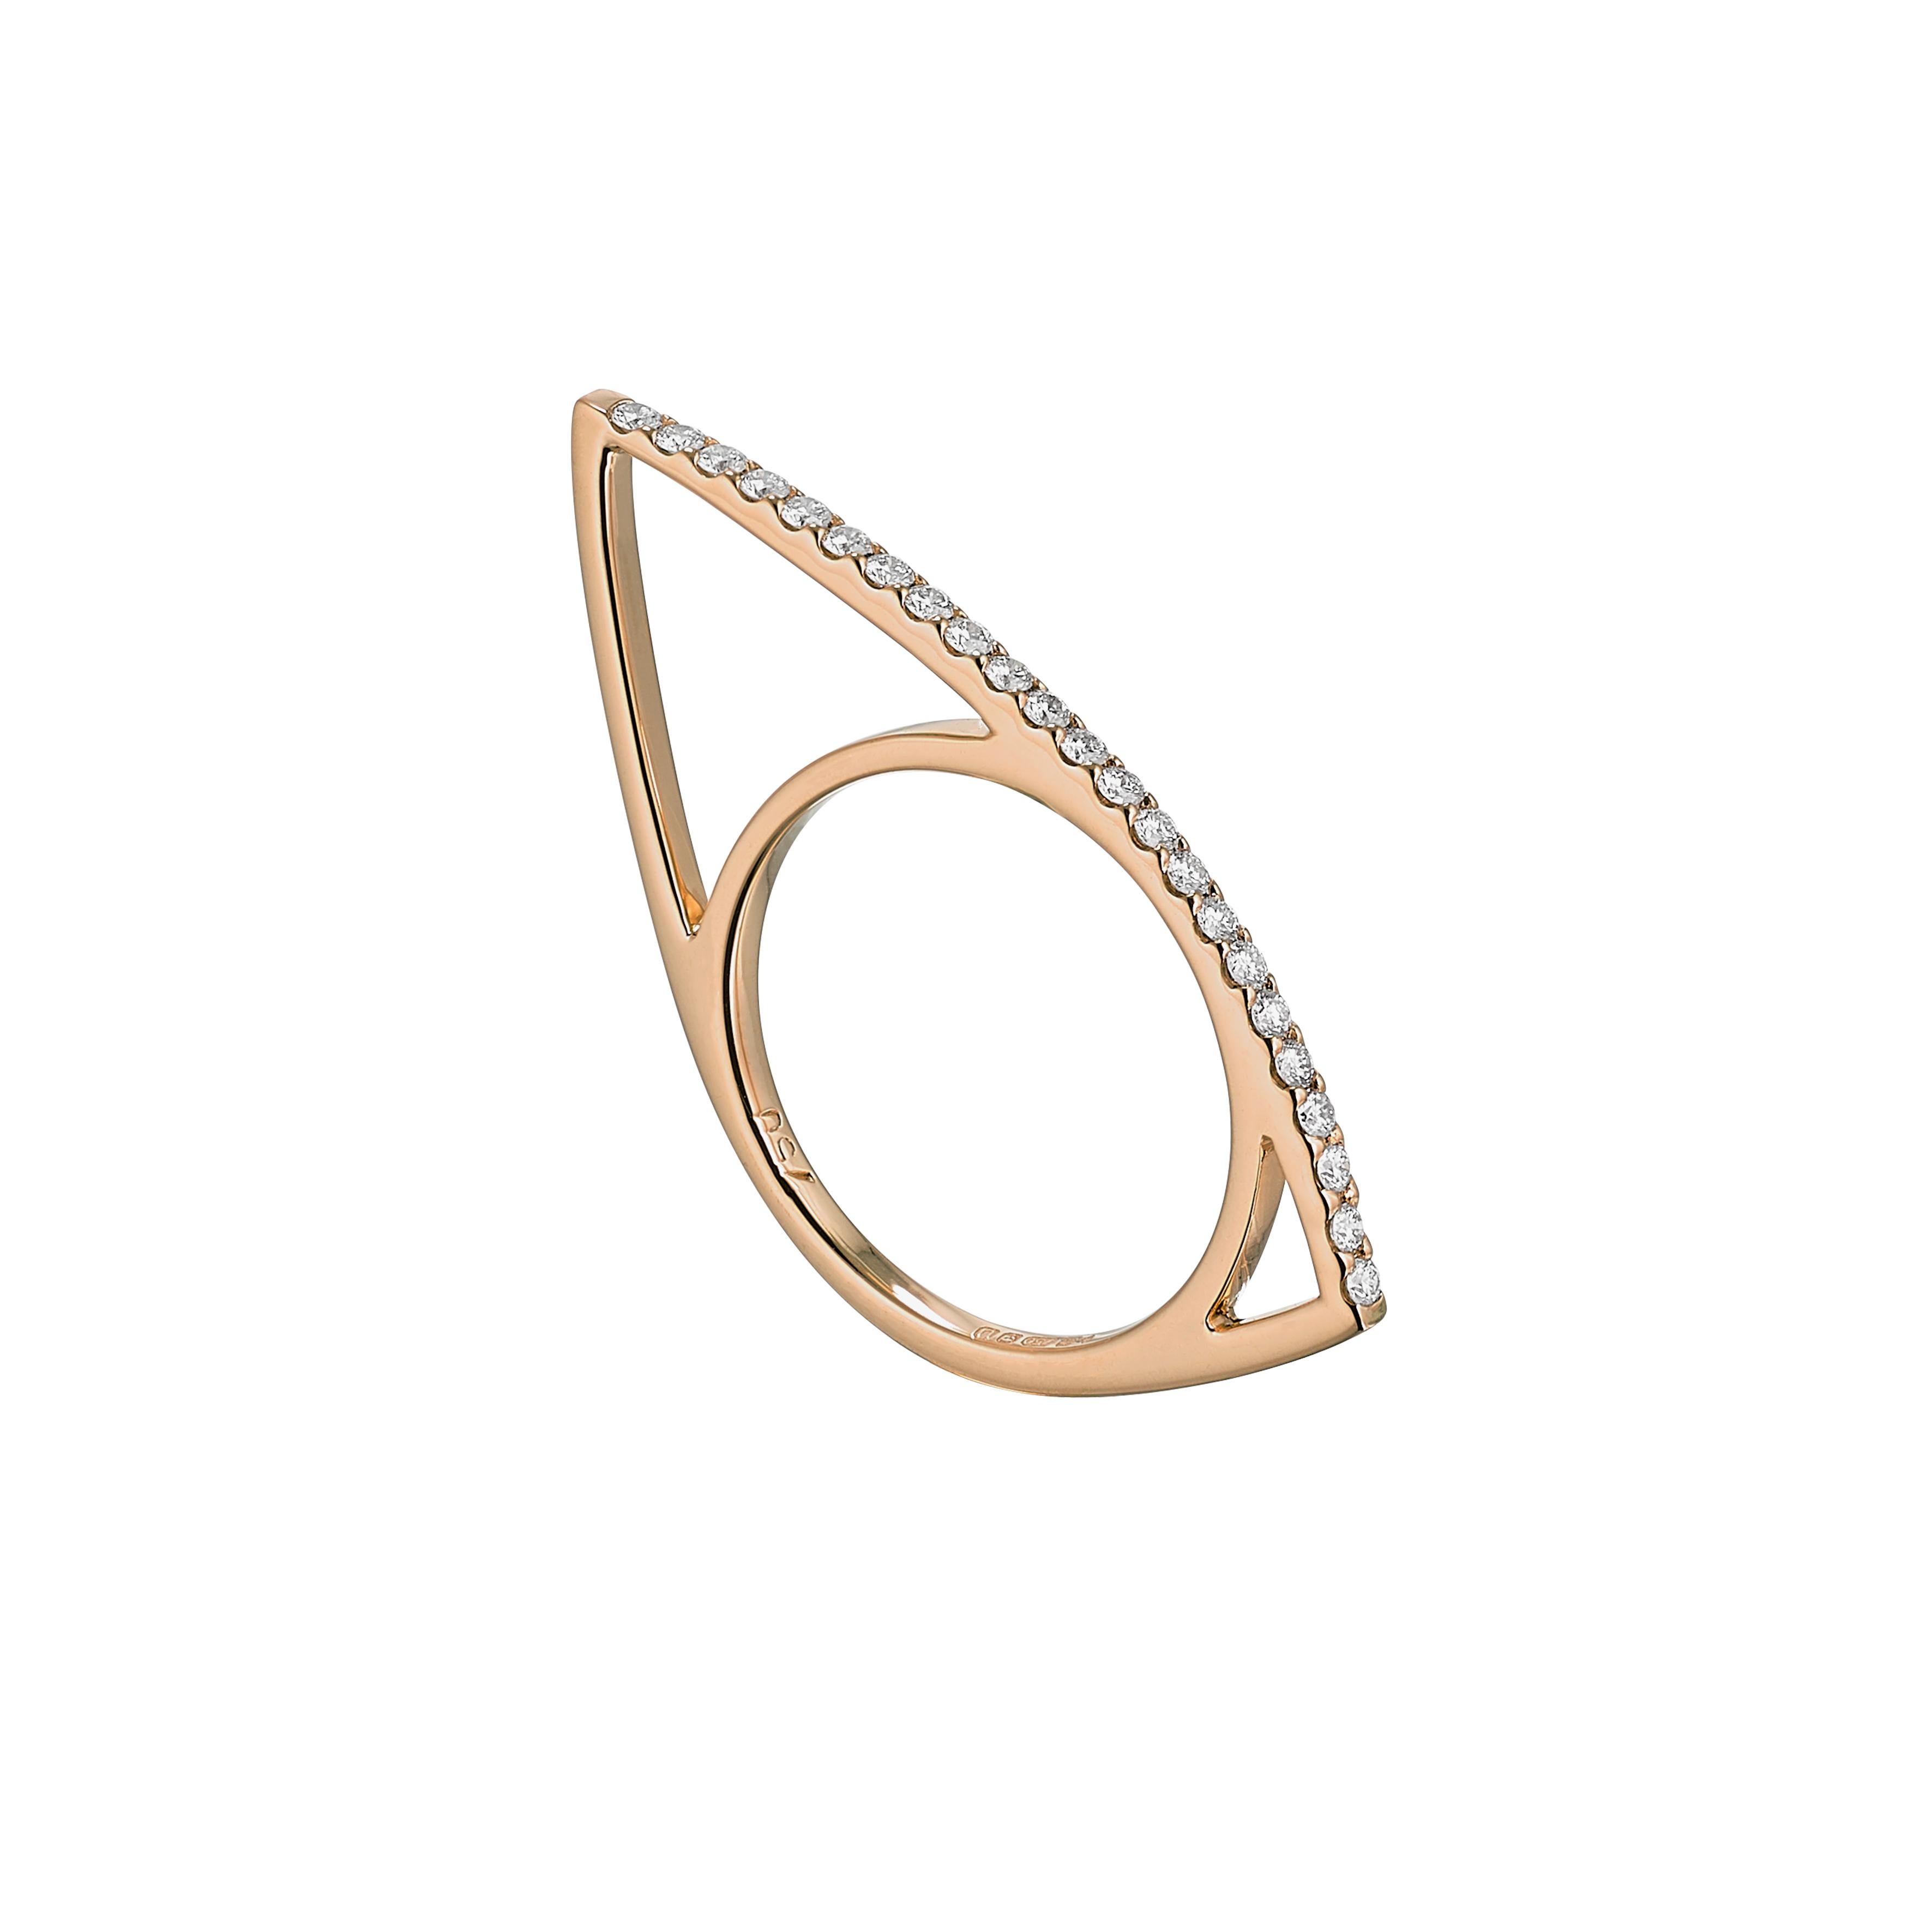 Contemporary Anabela Chan Fine Sustainable Jewelry Rose Gold Diamond Morpho Ring. 01 For Sale